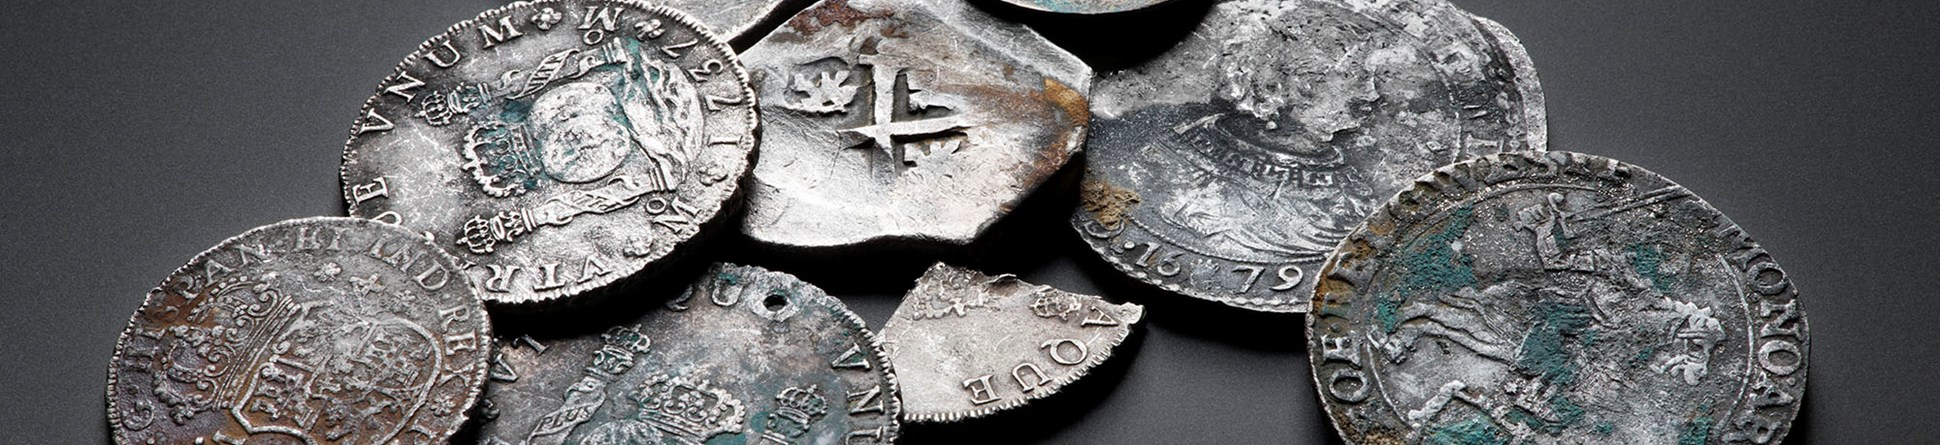 Collection of the different coins that were found in the wreck of the Rooswijk.